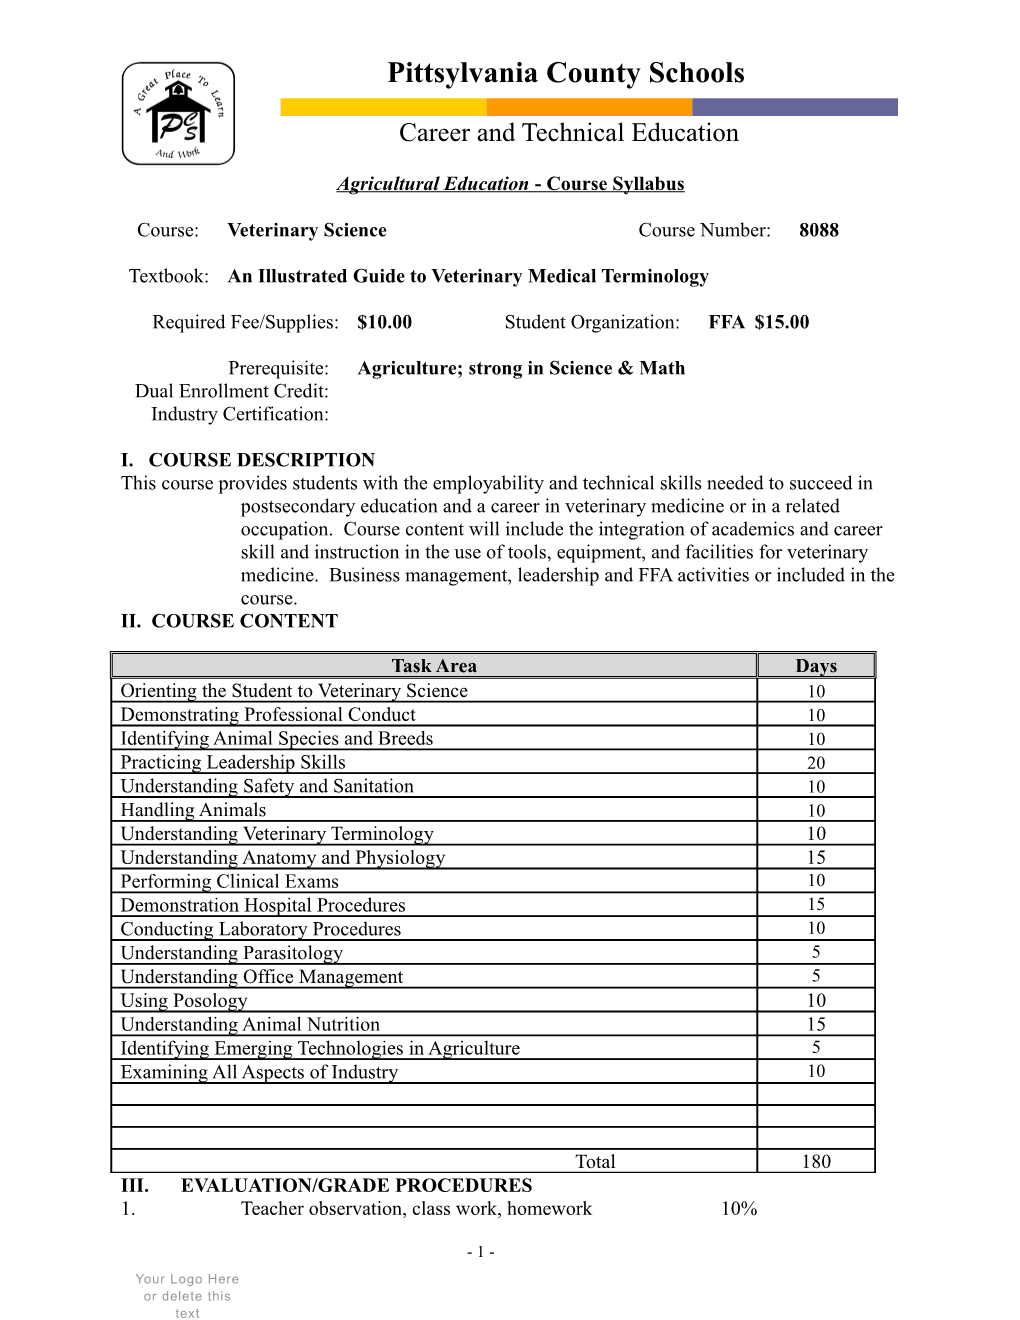 Agricultural Education Course Syllabus s4